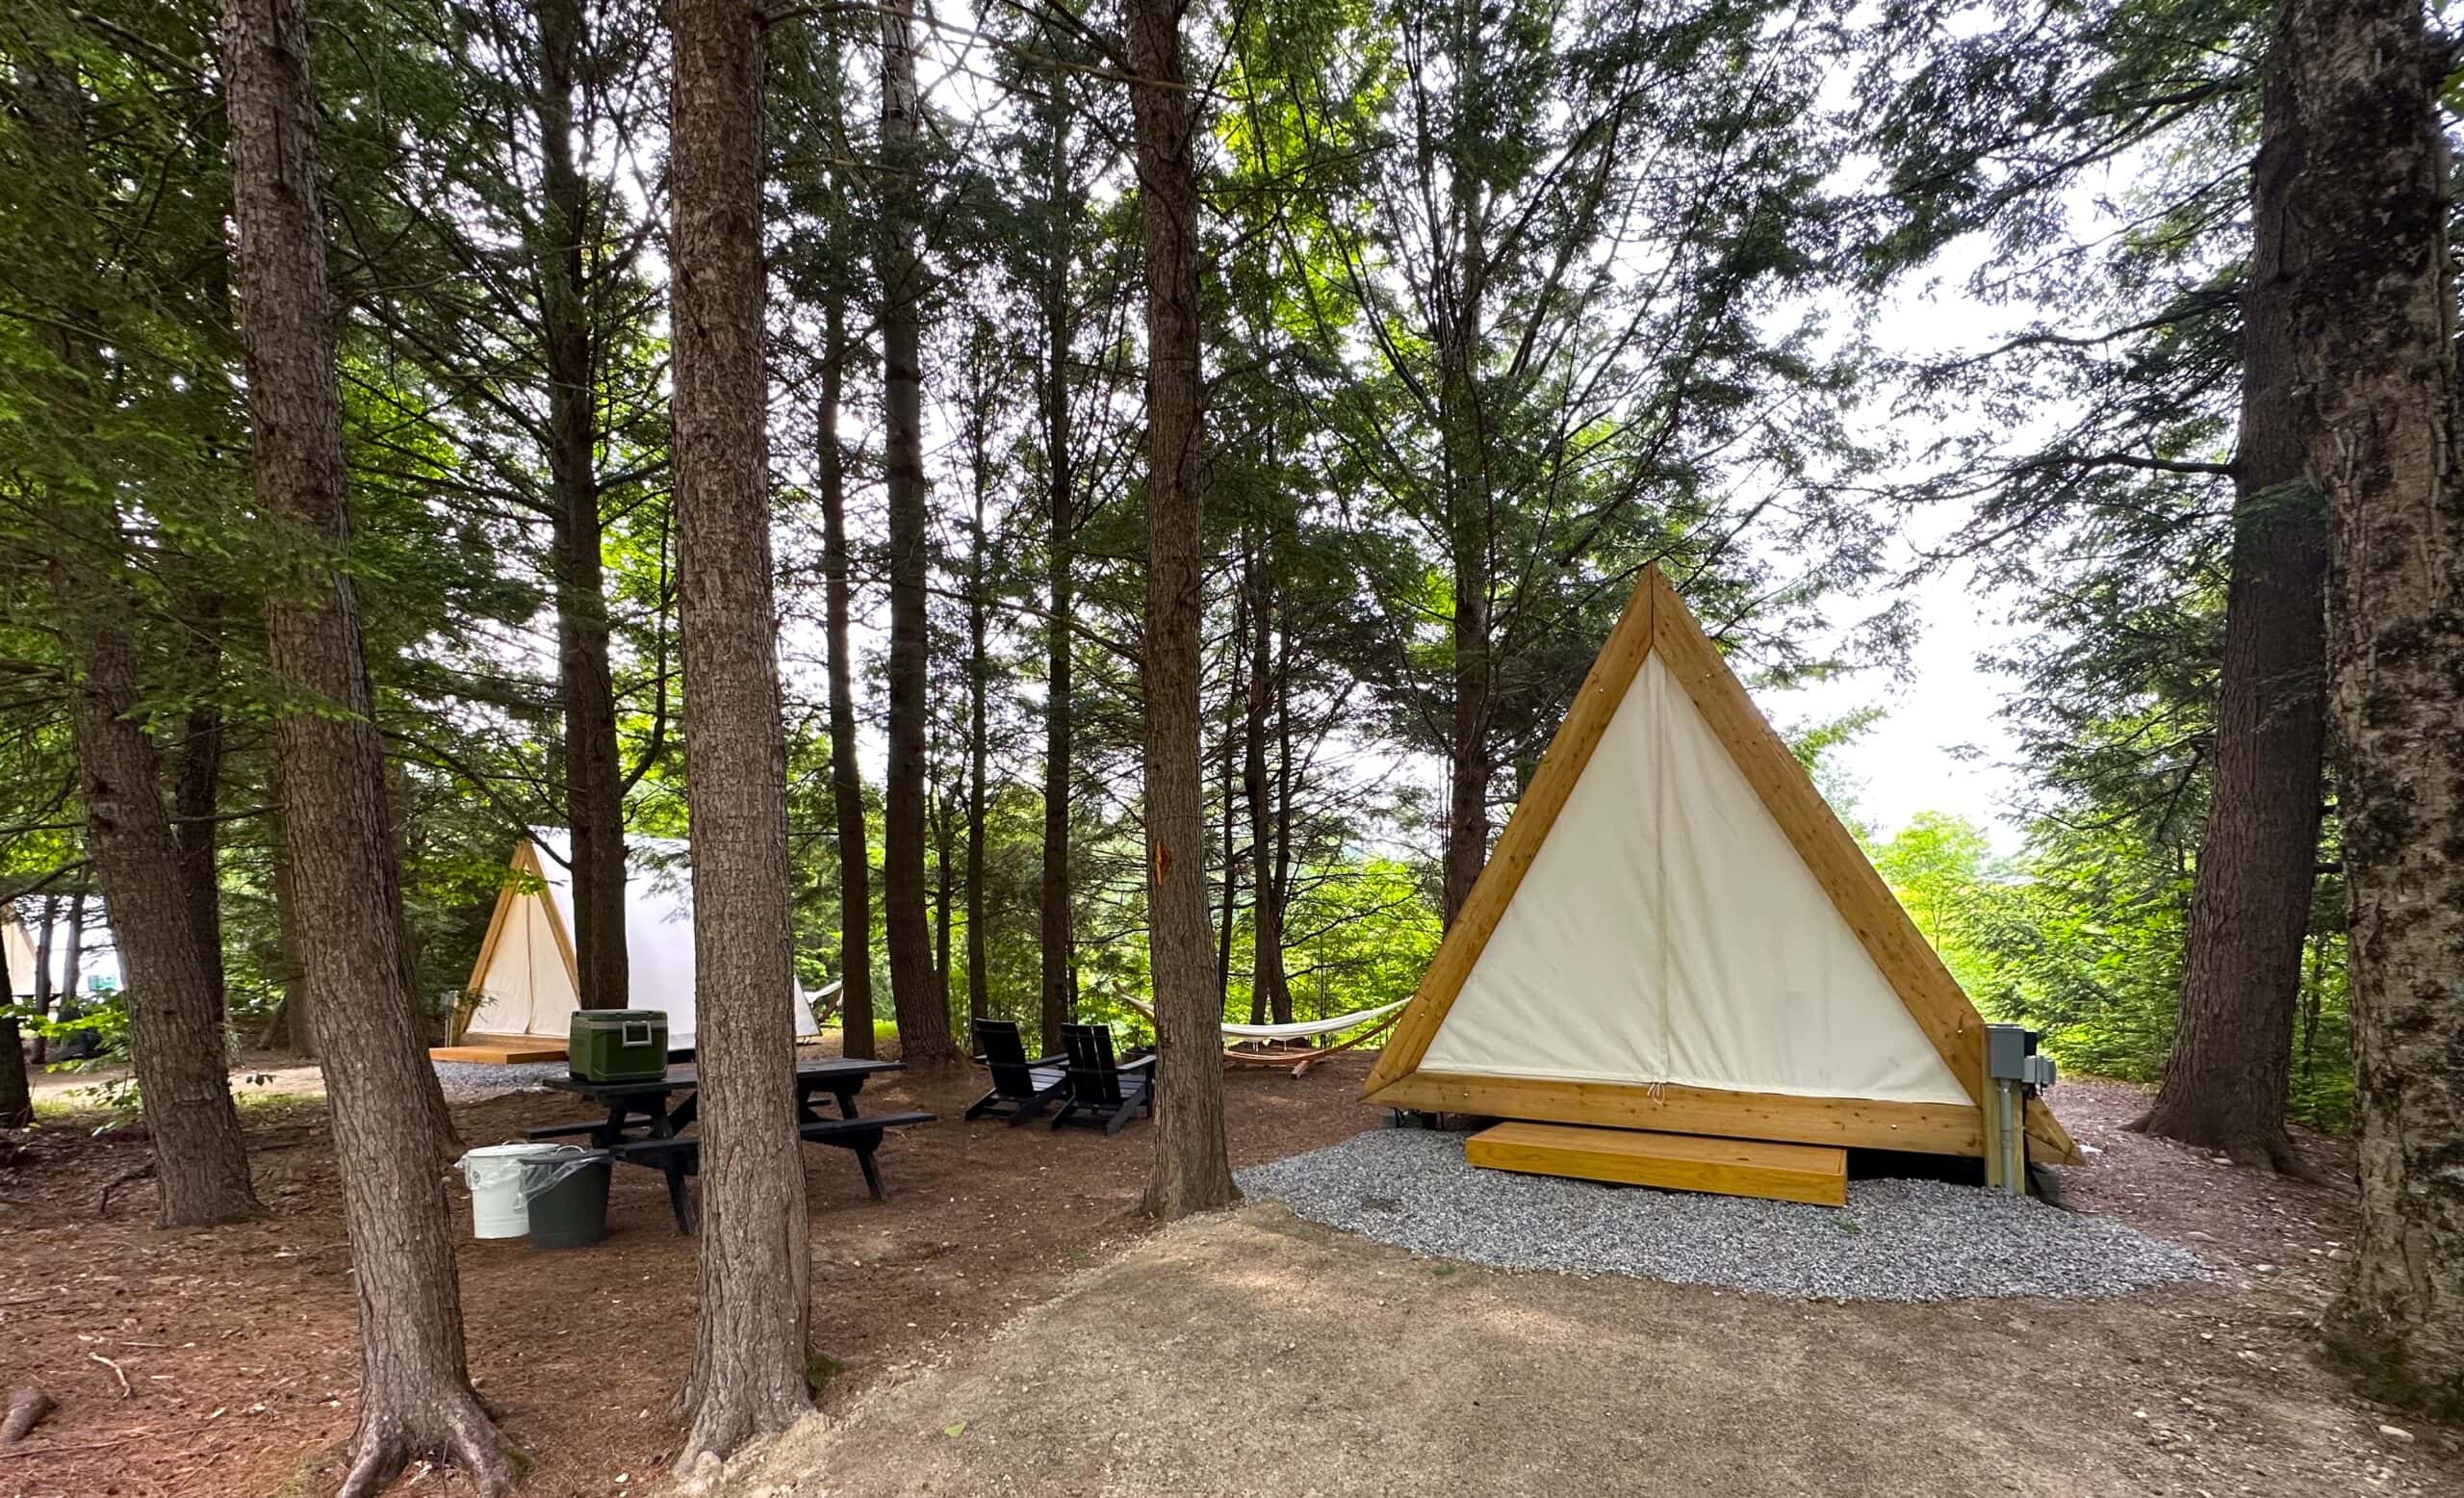 A-frame canvas tents at the Lumen Nature Retreat